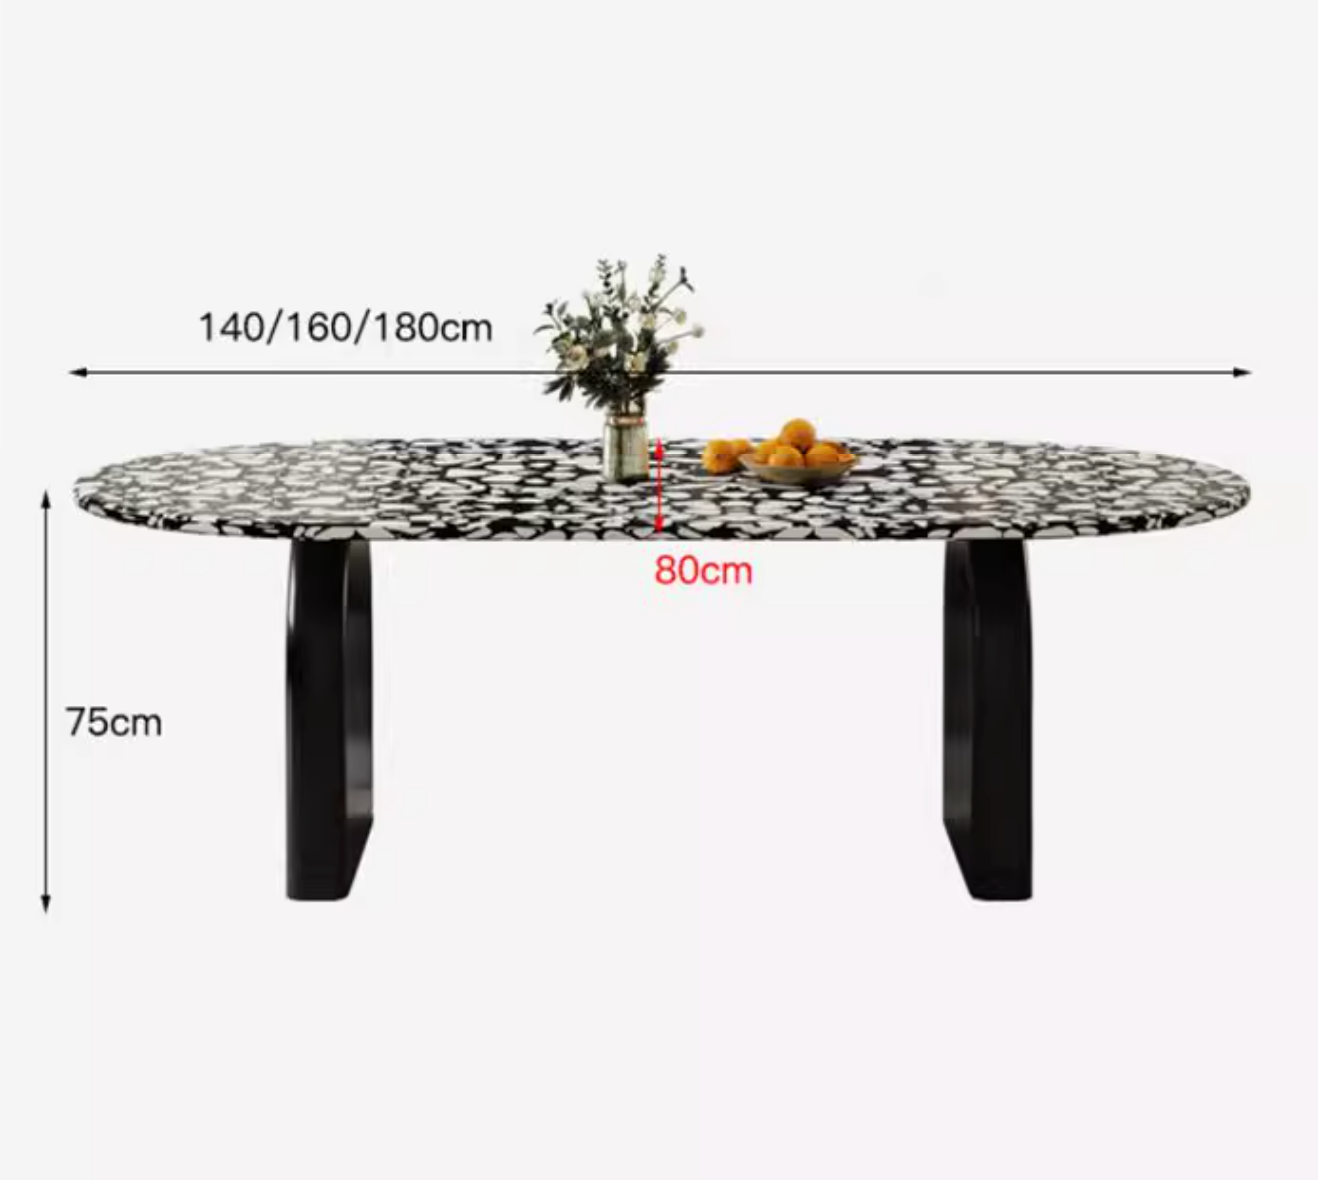 Eaton Dining Table